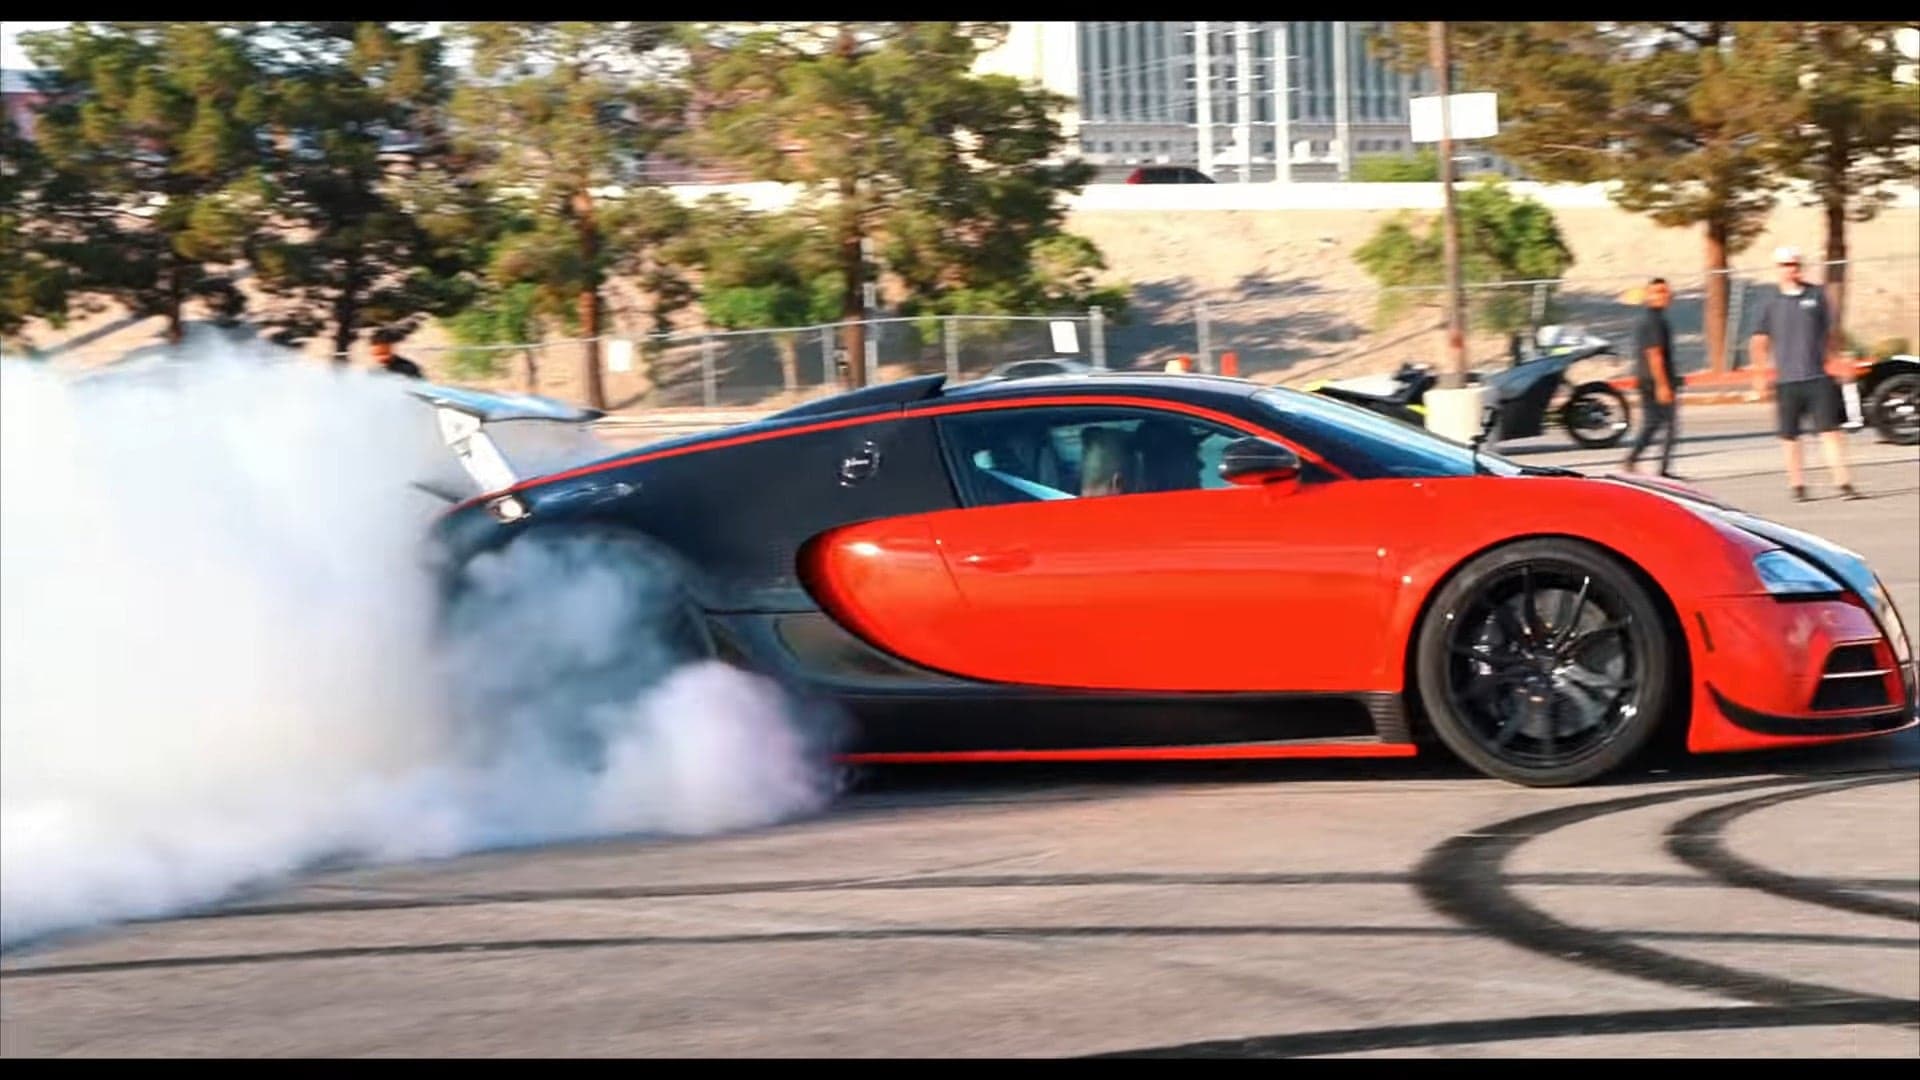 A Bugatti Veyron Converted to Rear-Wheel Drive Is a Master of Donuts